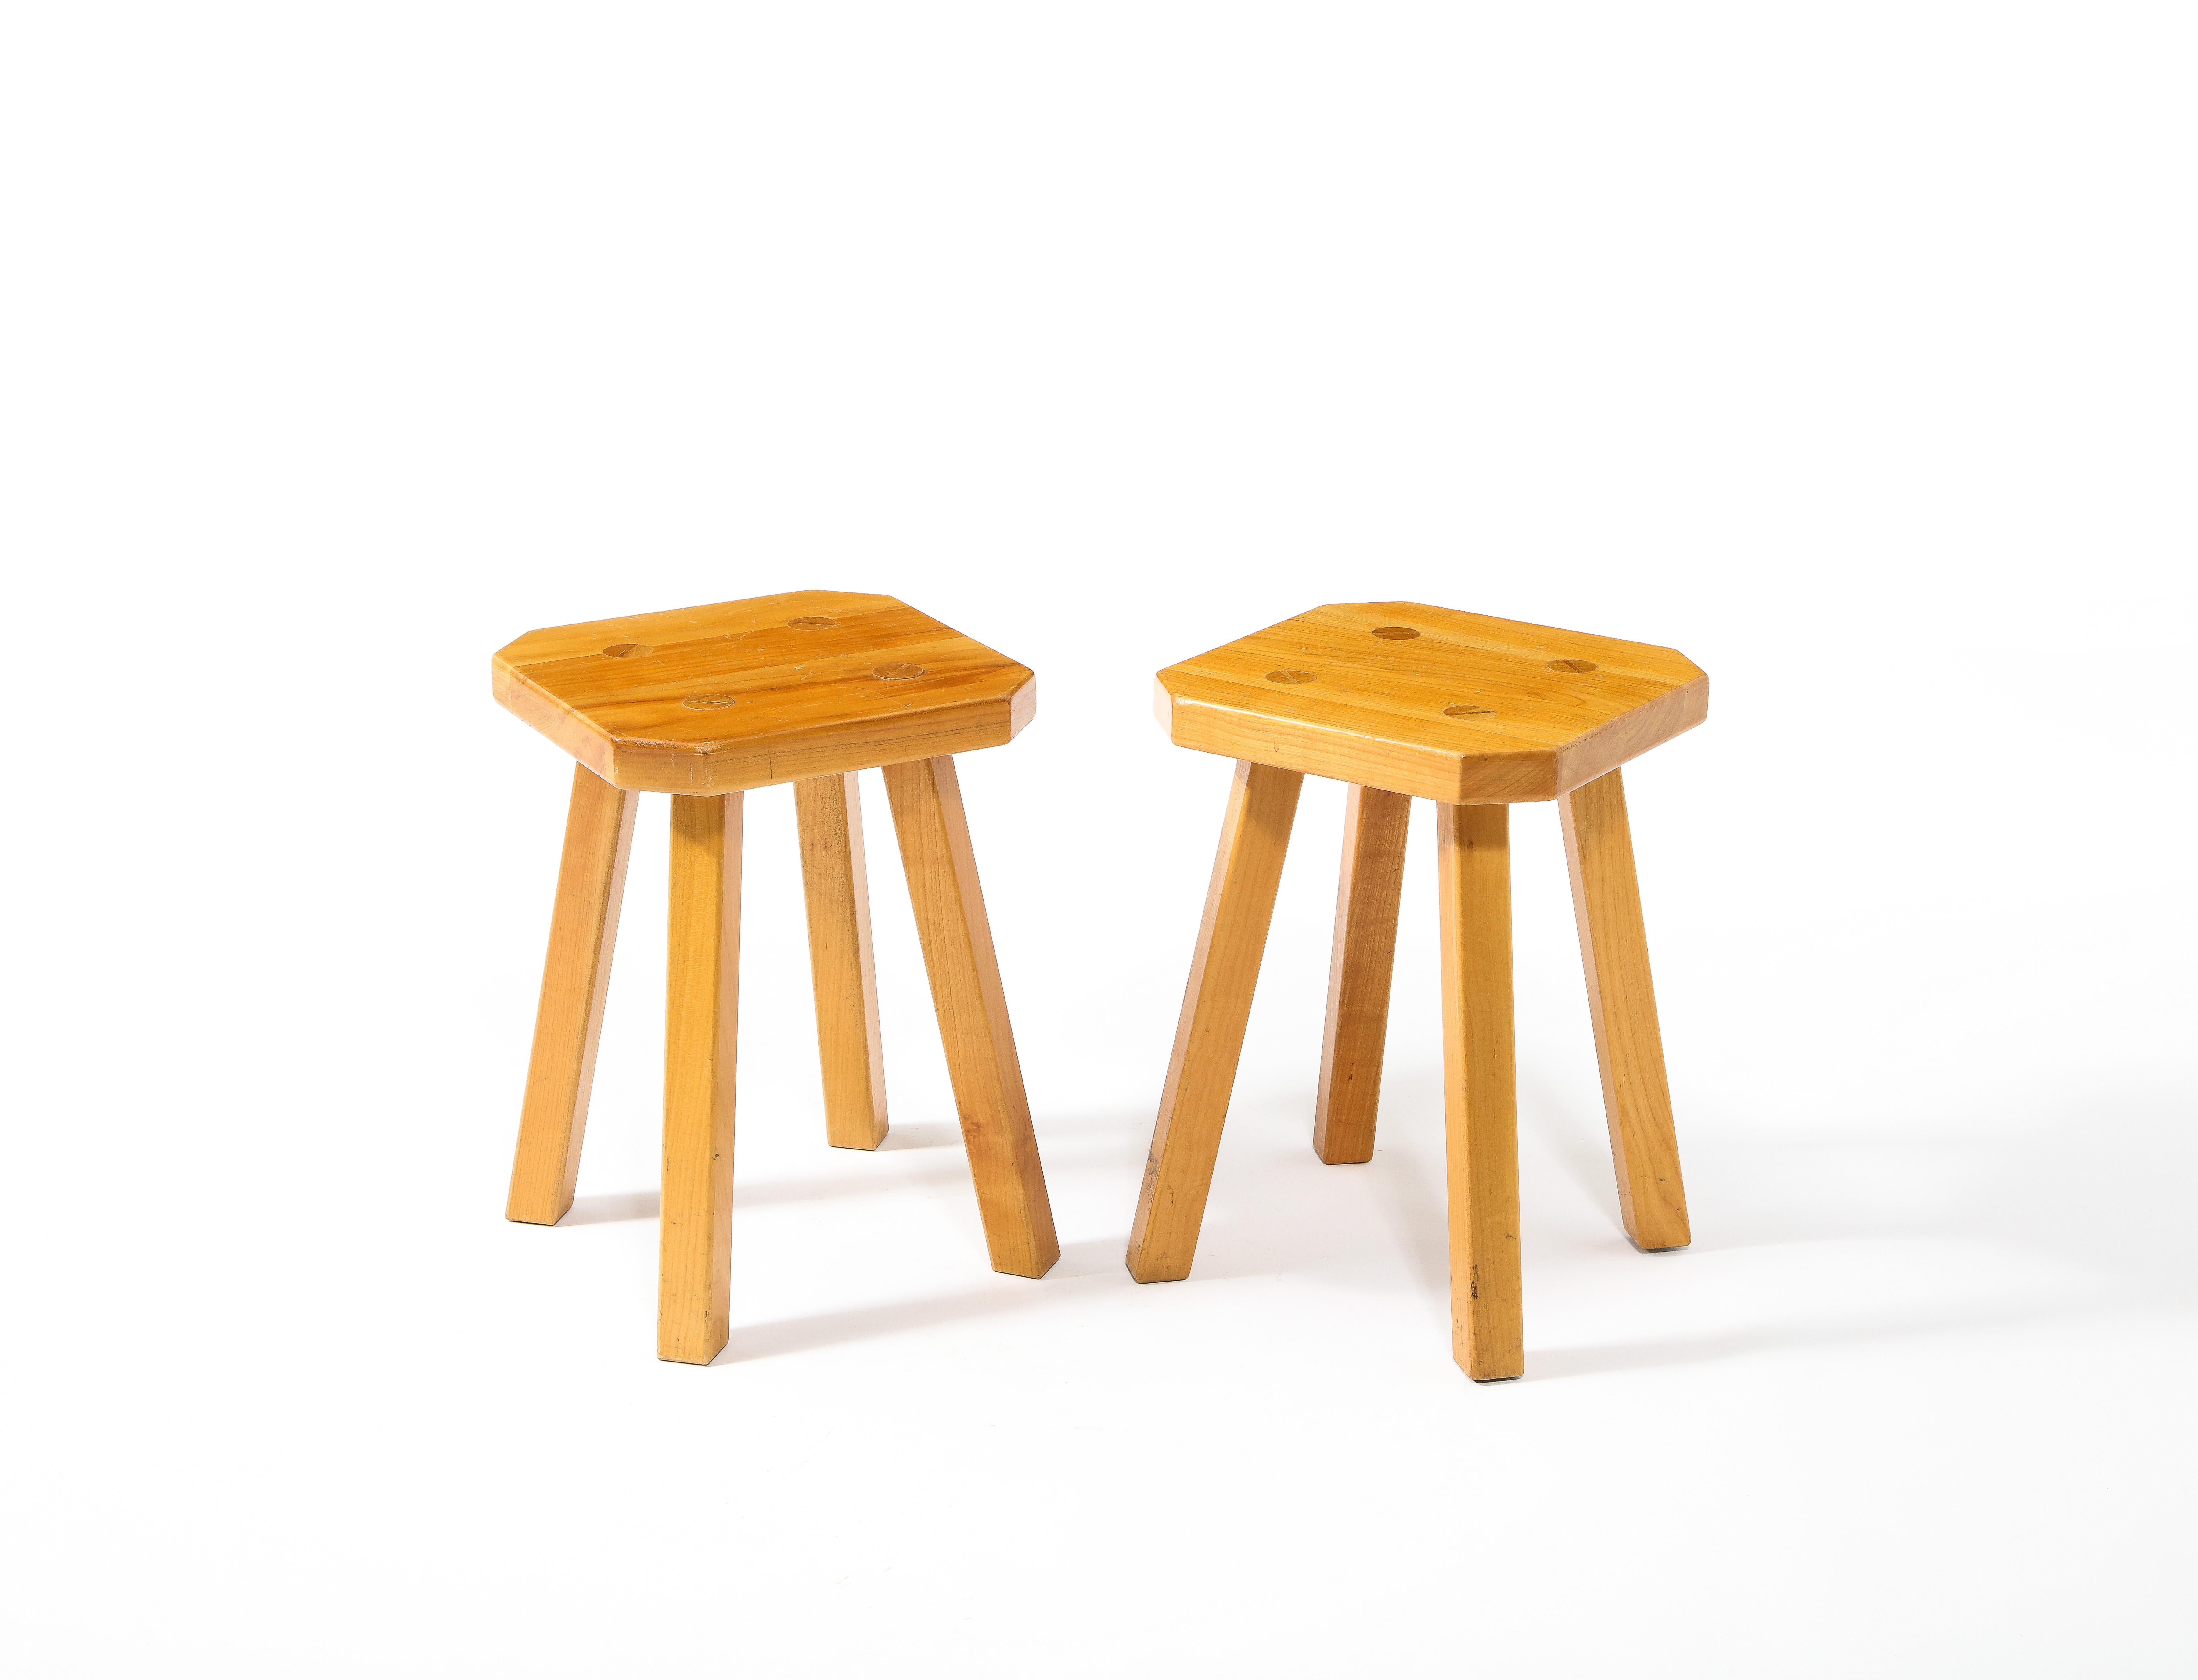 A pair of honey-colored Elm stools with octagonal tops.